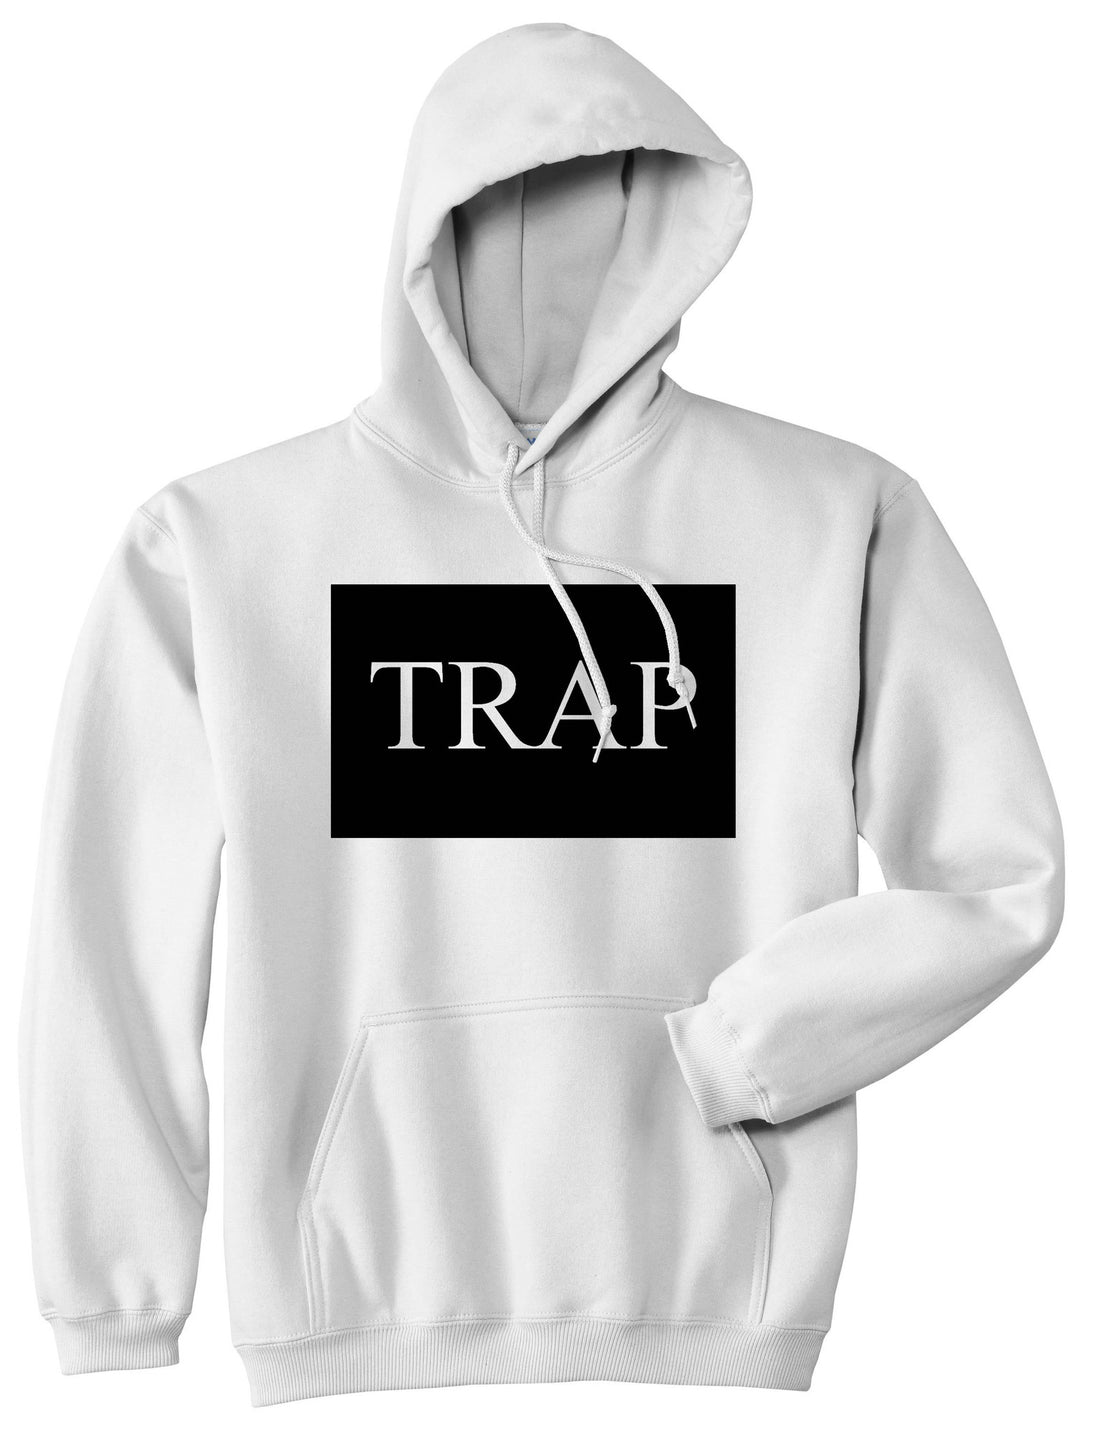 Trap Rectangle Logo Pullover Hoodie in White By Kings Of NY